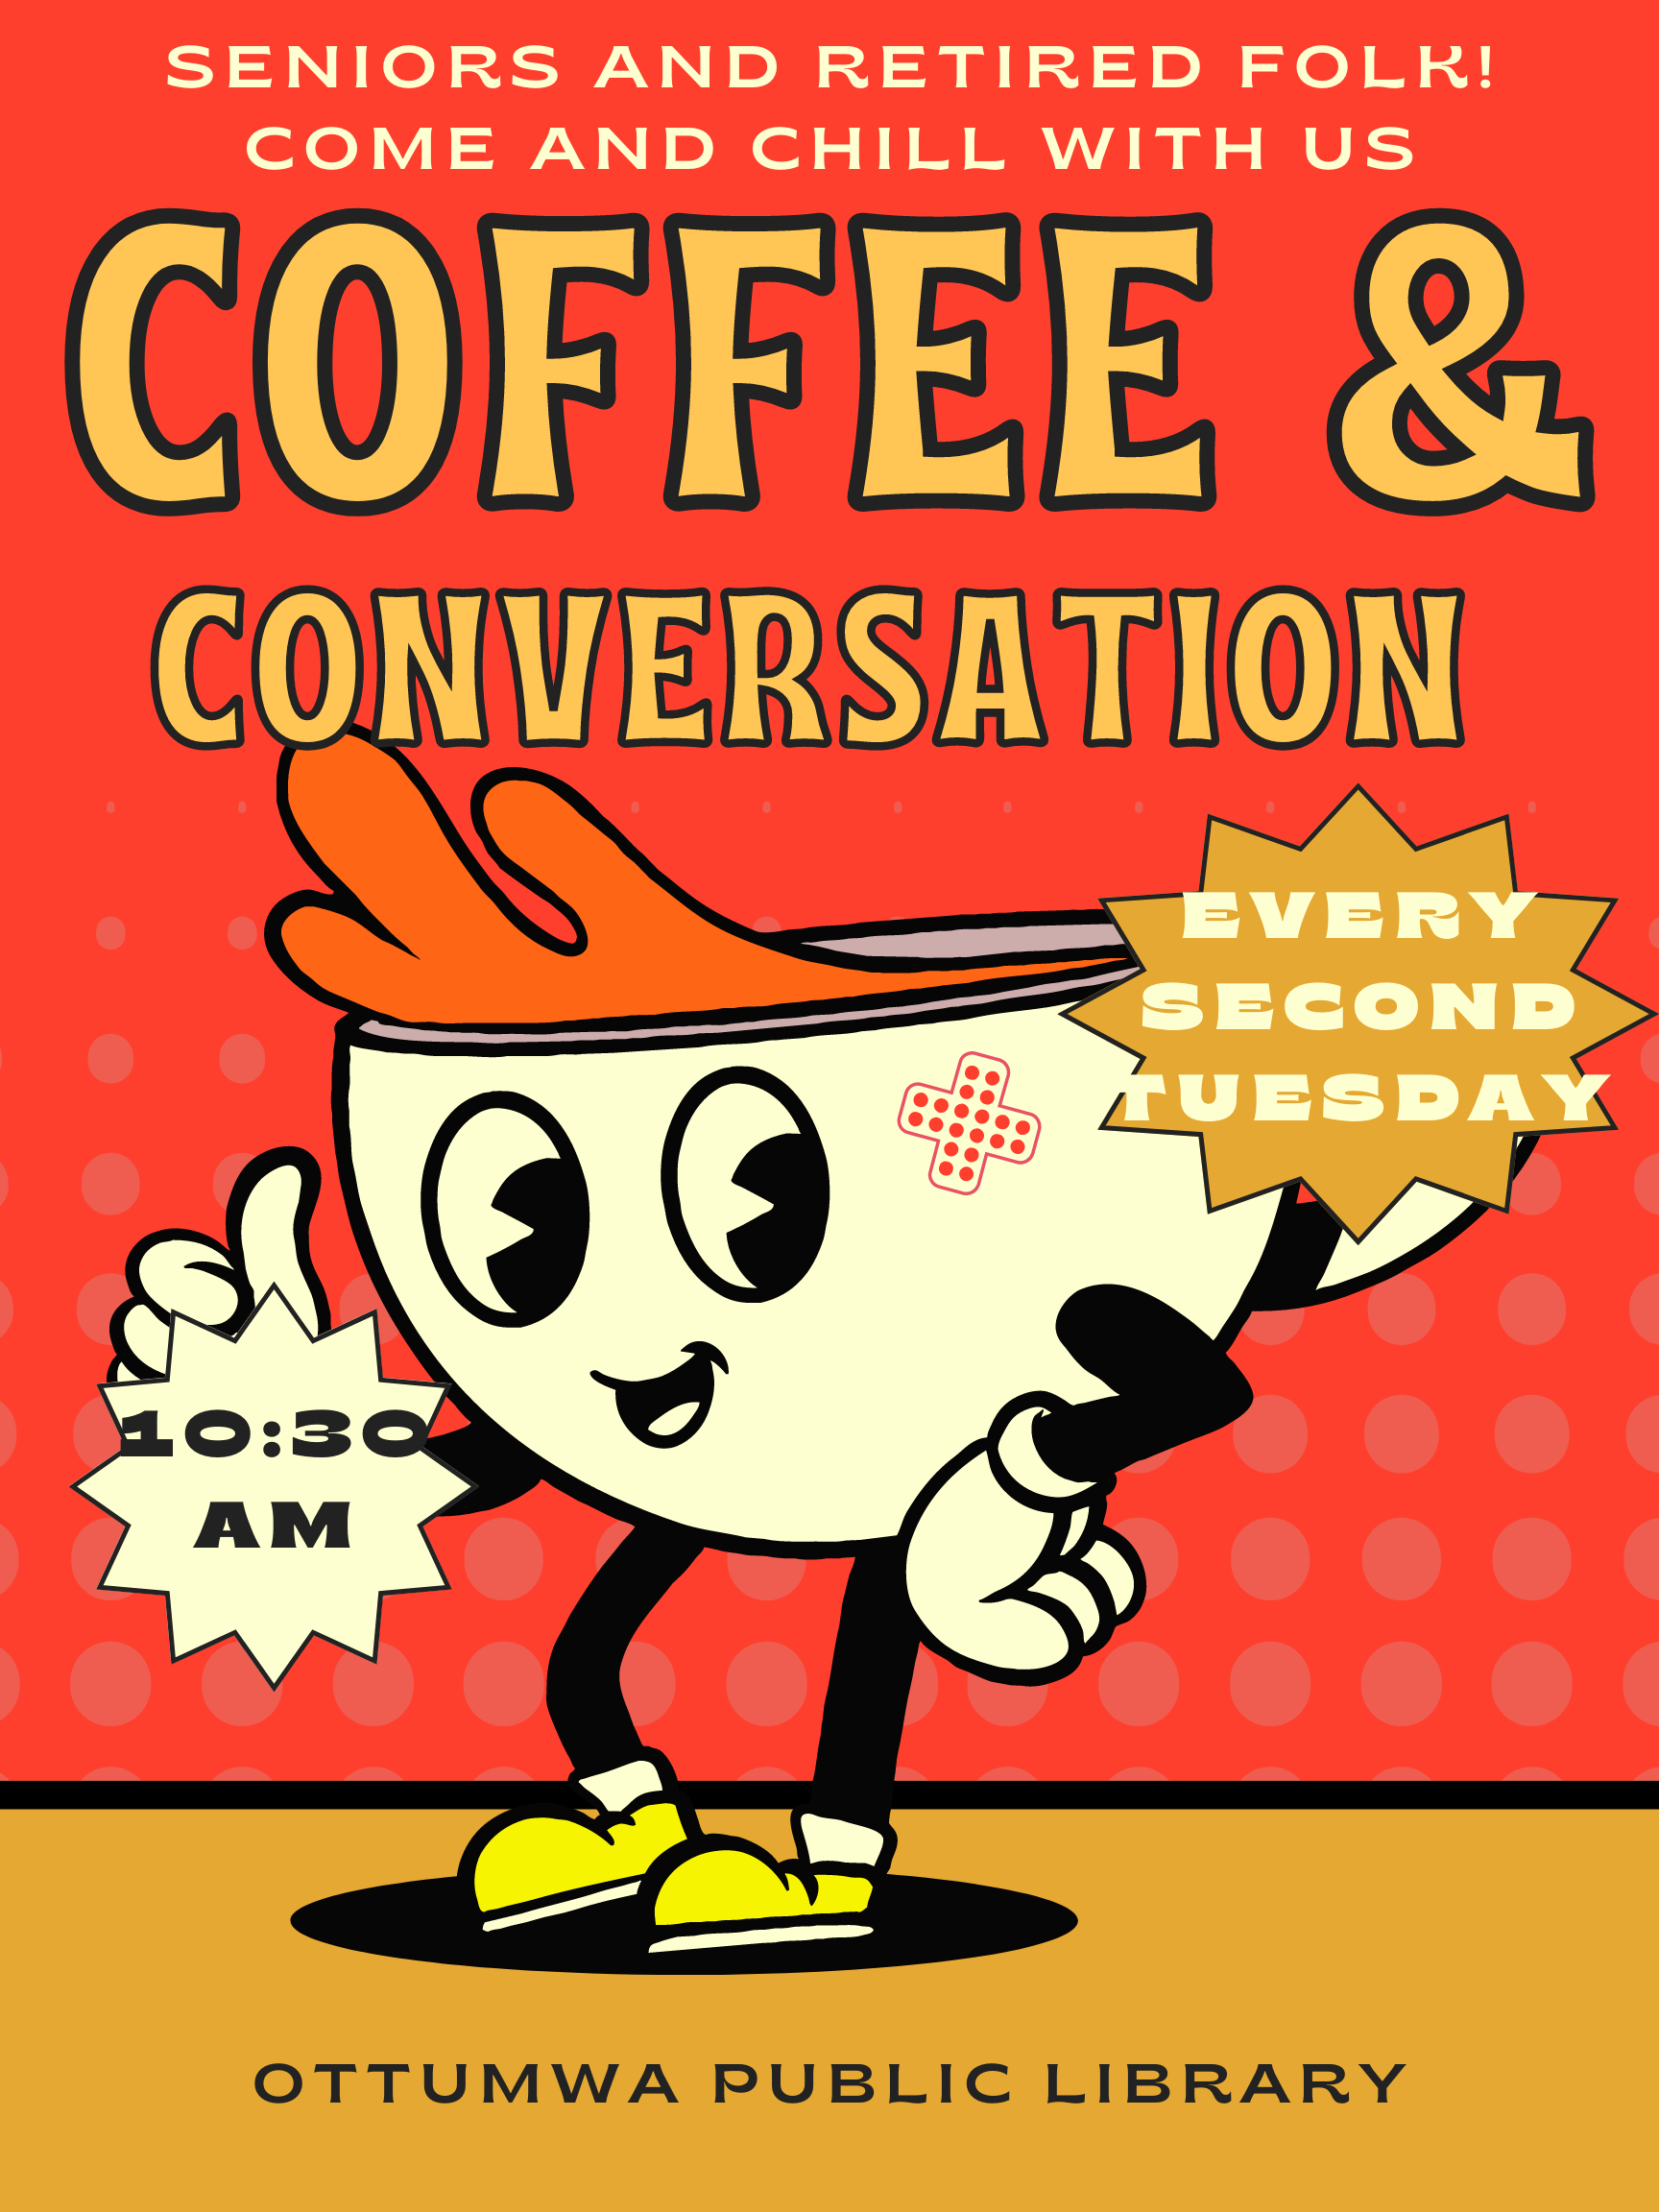 May coffee and conversation